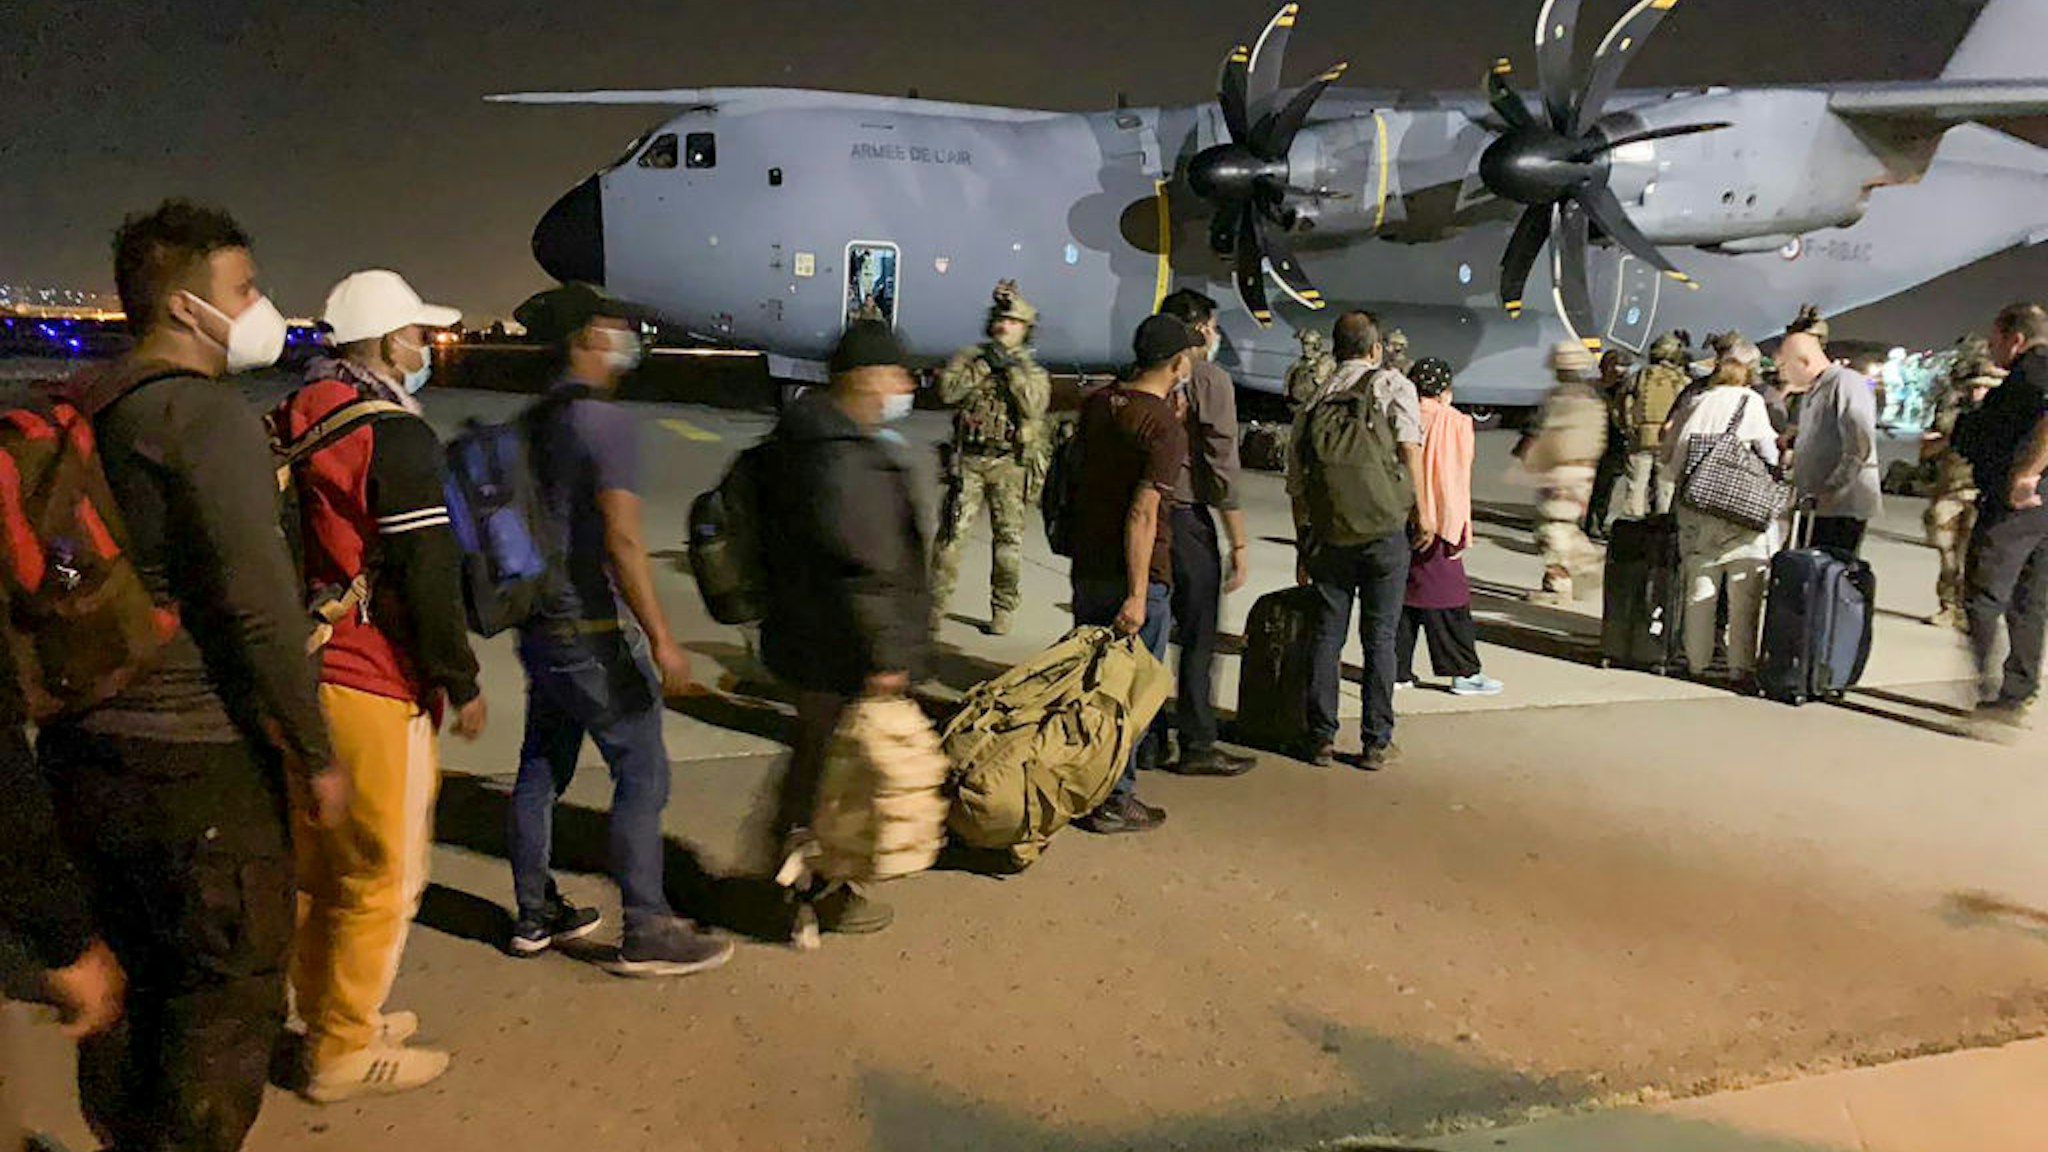 TOPSHOT - People line up to board a French military transport plane at the Kabul airport on August 17, 2021, for evacuation from Afghanistan after the Taliban's stunning military takeover of the country. (Photo by STR / AFP) (Photo by STR/AFP via Getty Images)